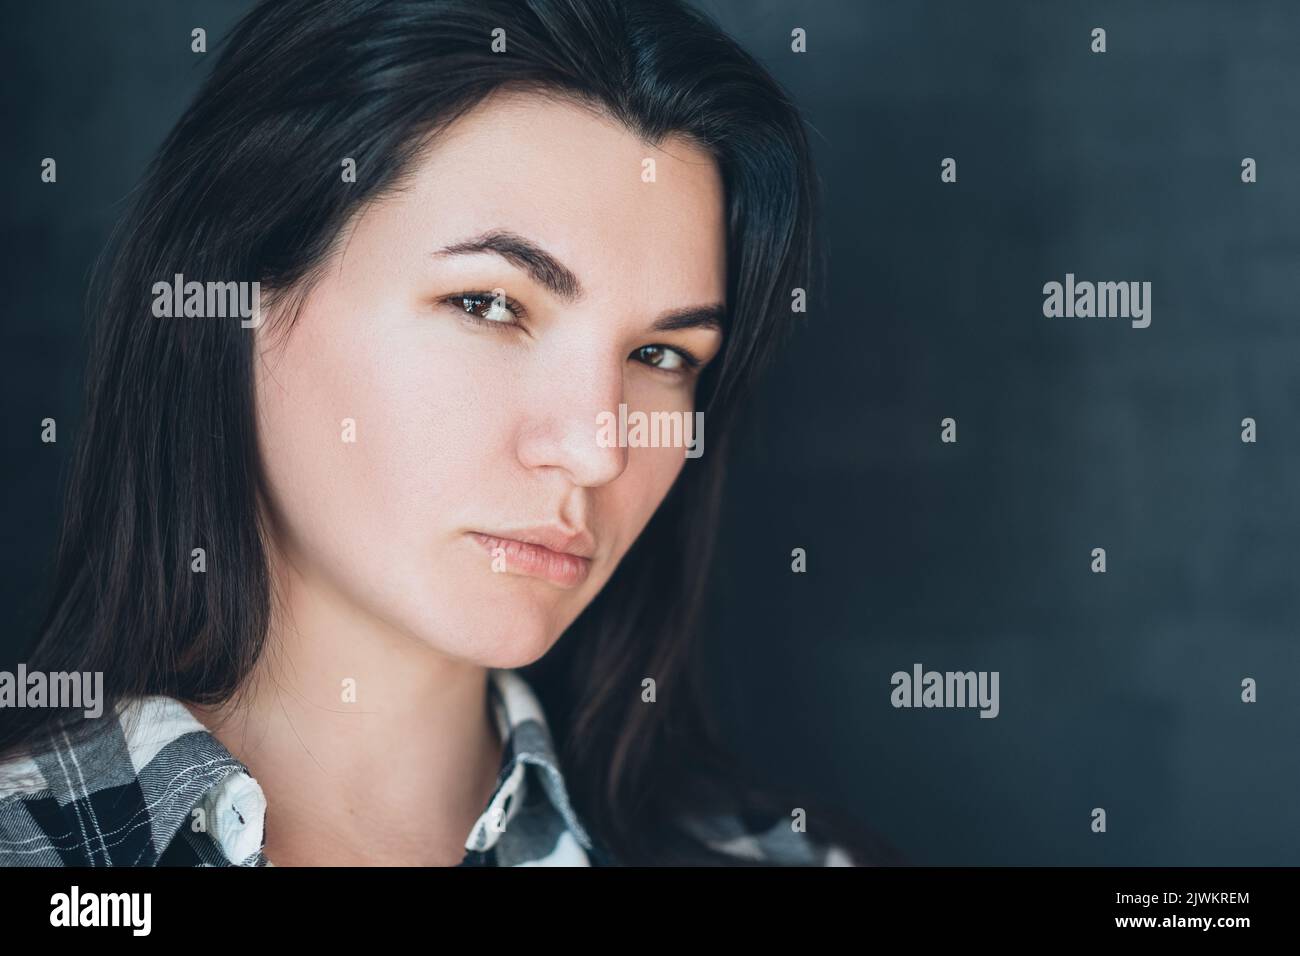 thoughtful young woman decision opinion serious Stock Photo